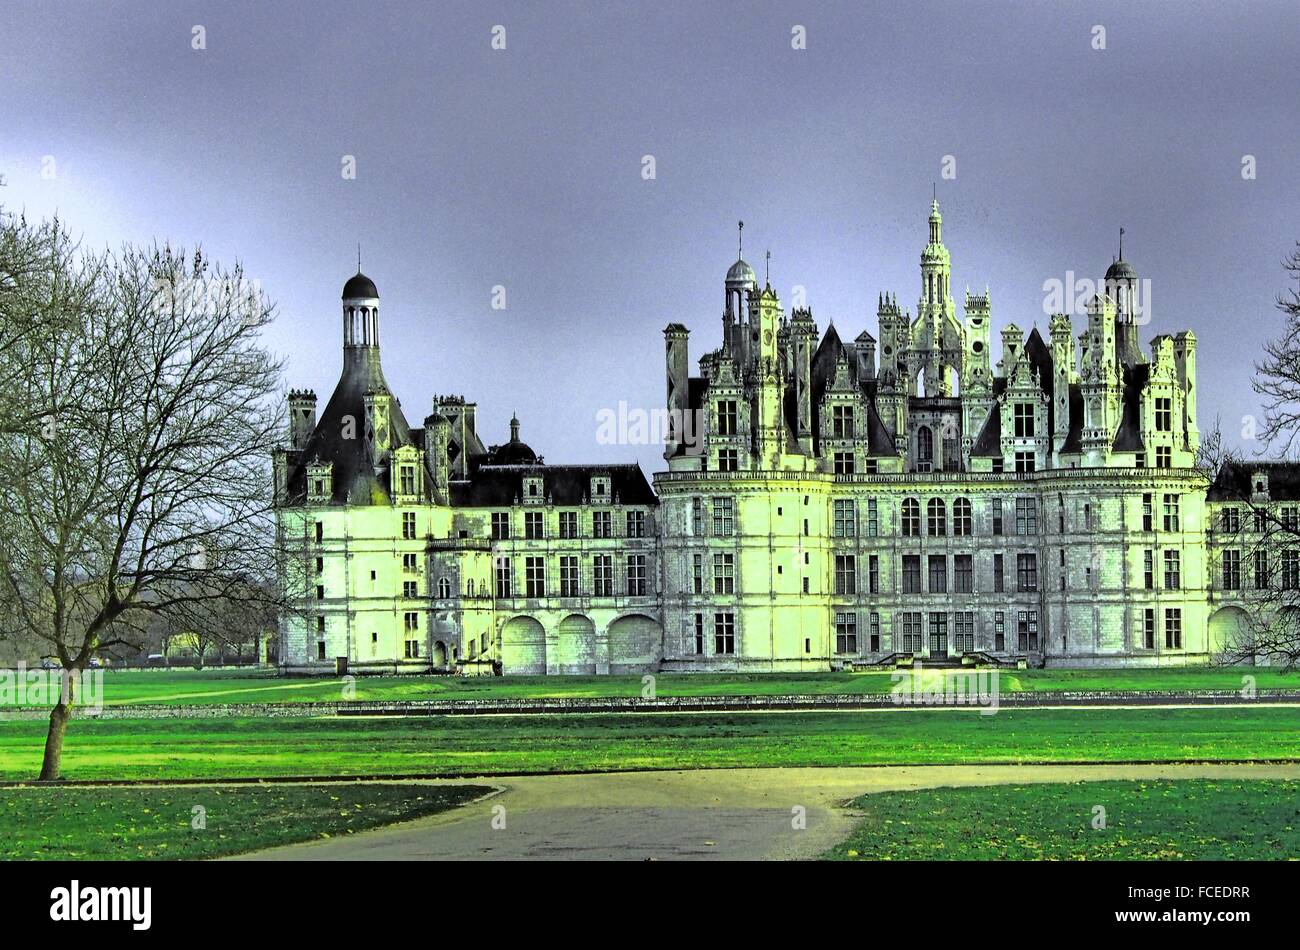 The royal Château de Chambord at Chambord, Loir-et-Cher, France, is one of the most recognizable châteaux in the world because Stock Photo